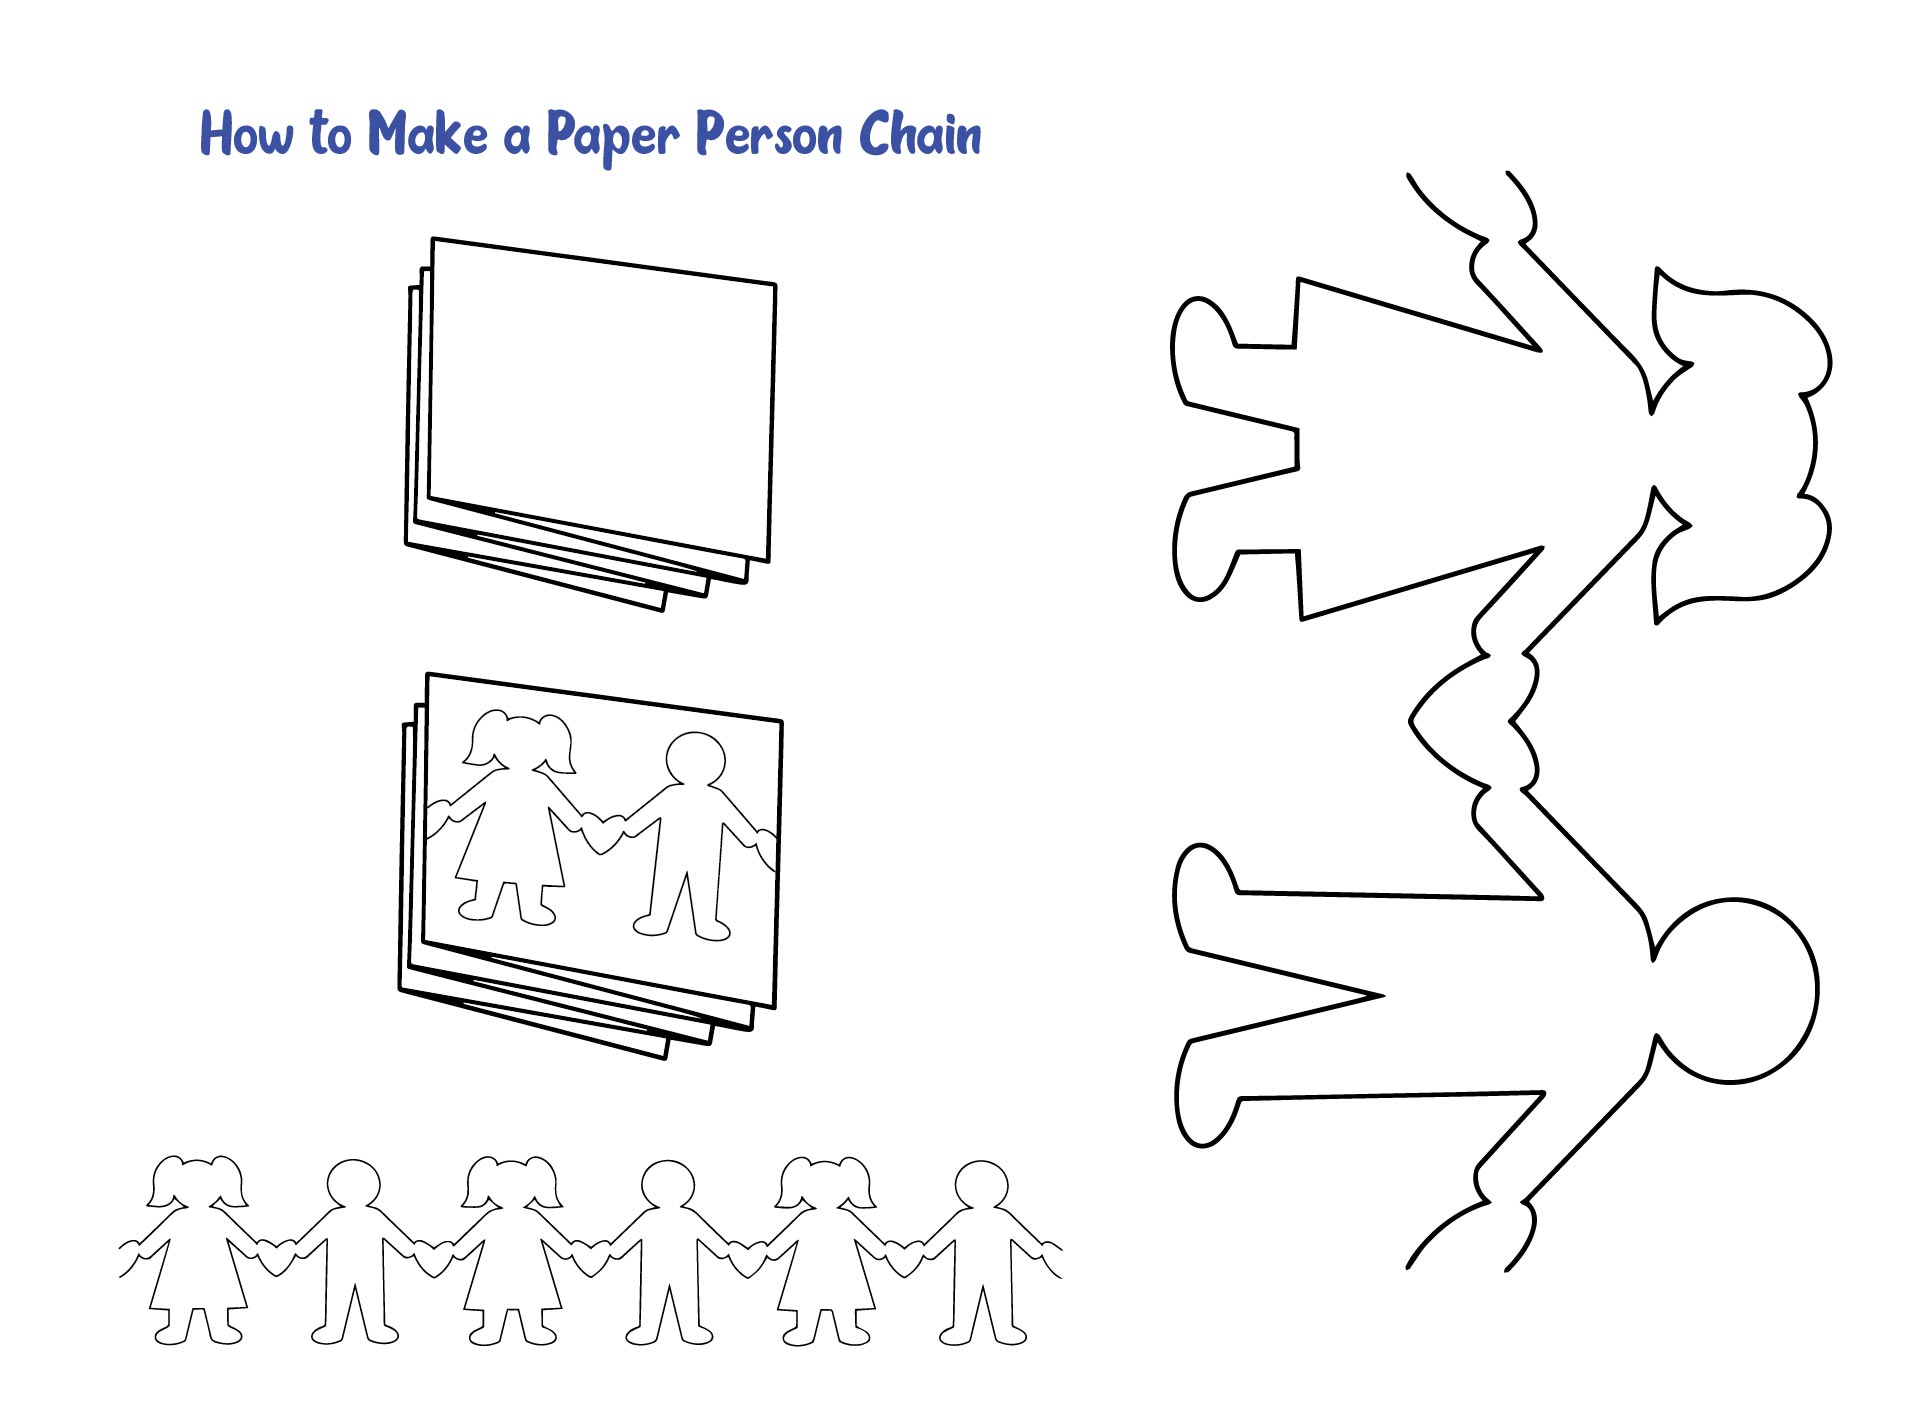 How to Make a Paper Person Chain